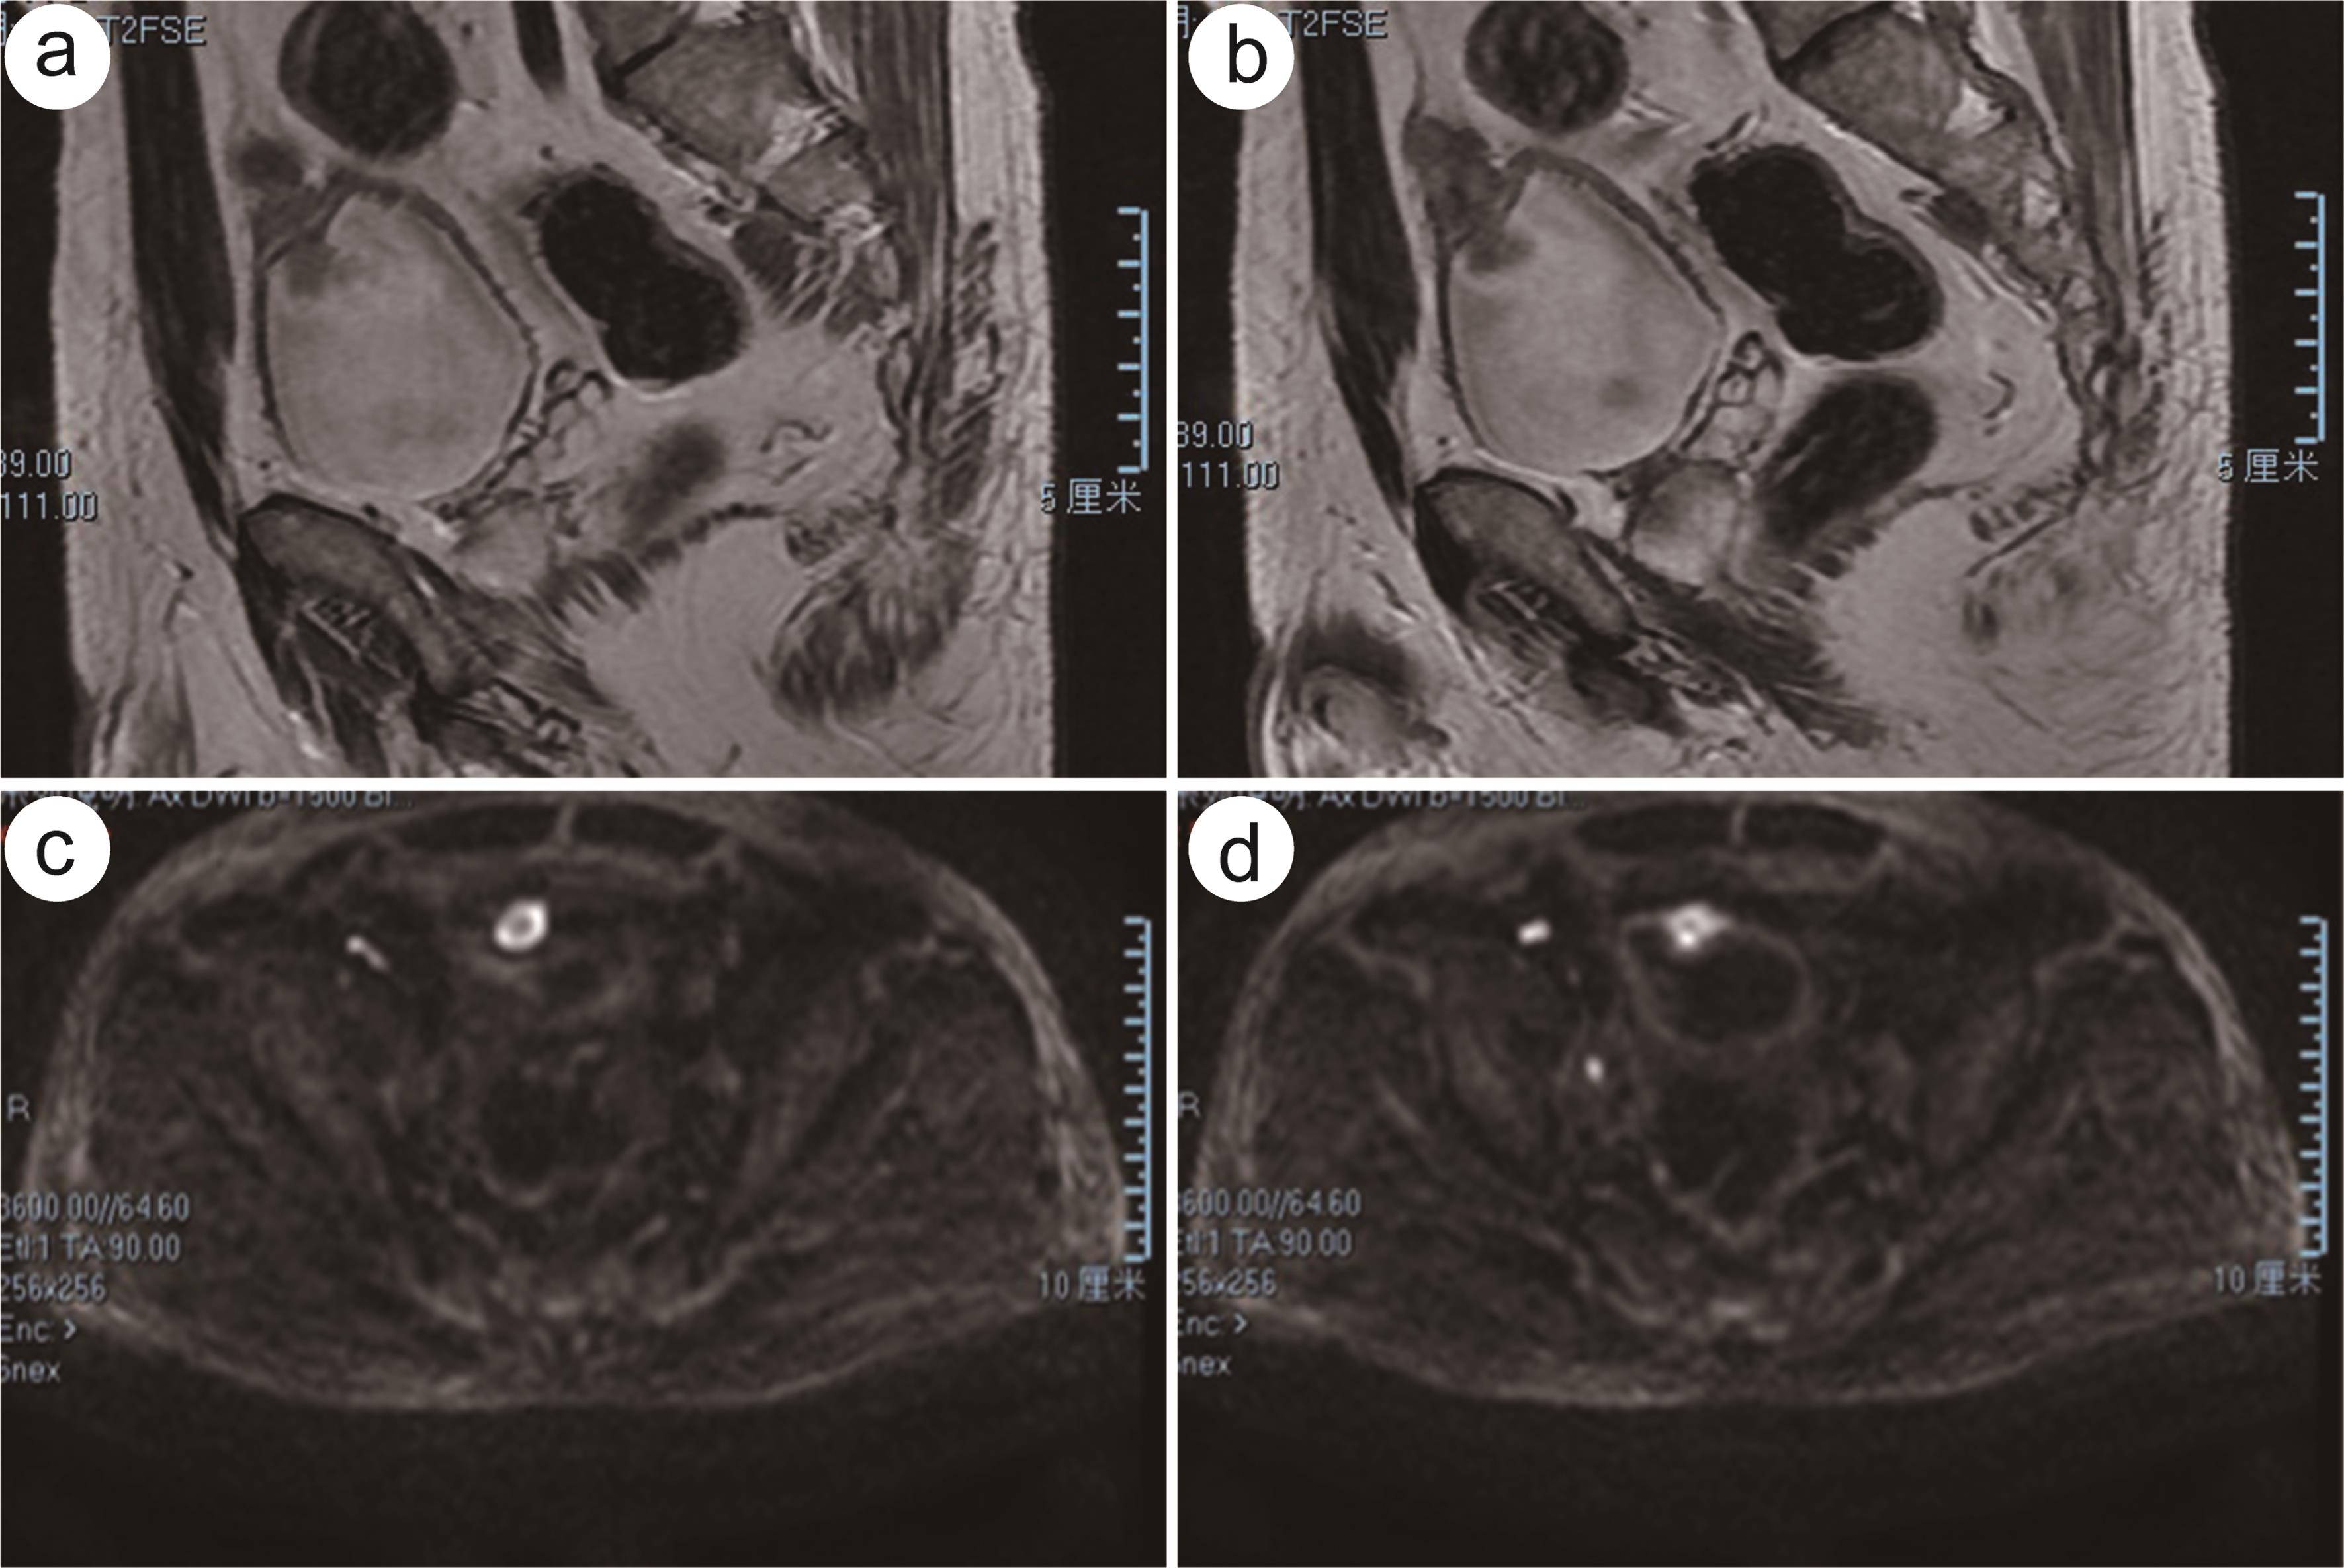 MRI showed that it was located at the junction of bladder and urachal, showing infiltrative growth (a, b). It was a predominantly high signal on diffusion-weighted imaging images with a low signal shadow visible within it (c, d).